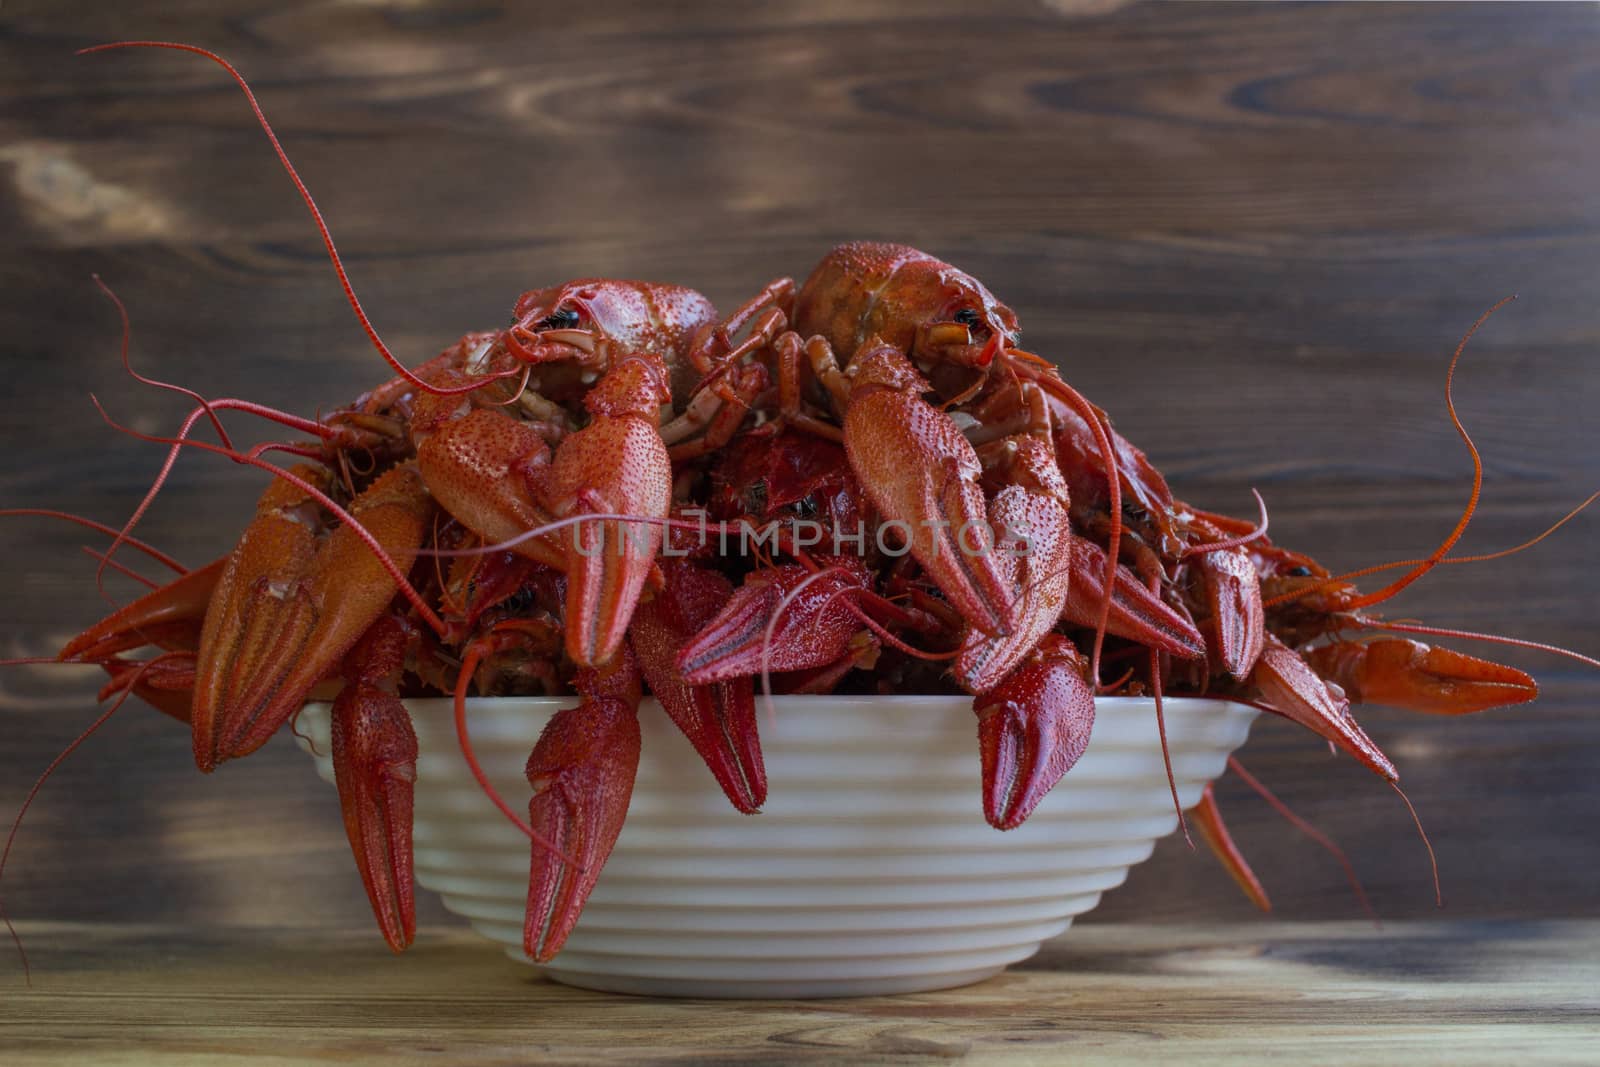 Plate of red boiled crayfishes with claws on wooden background